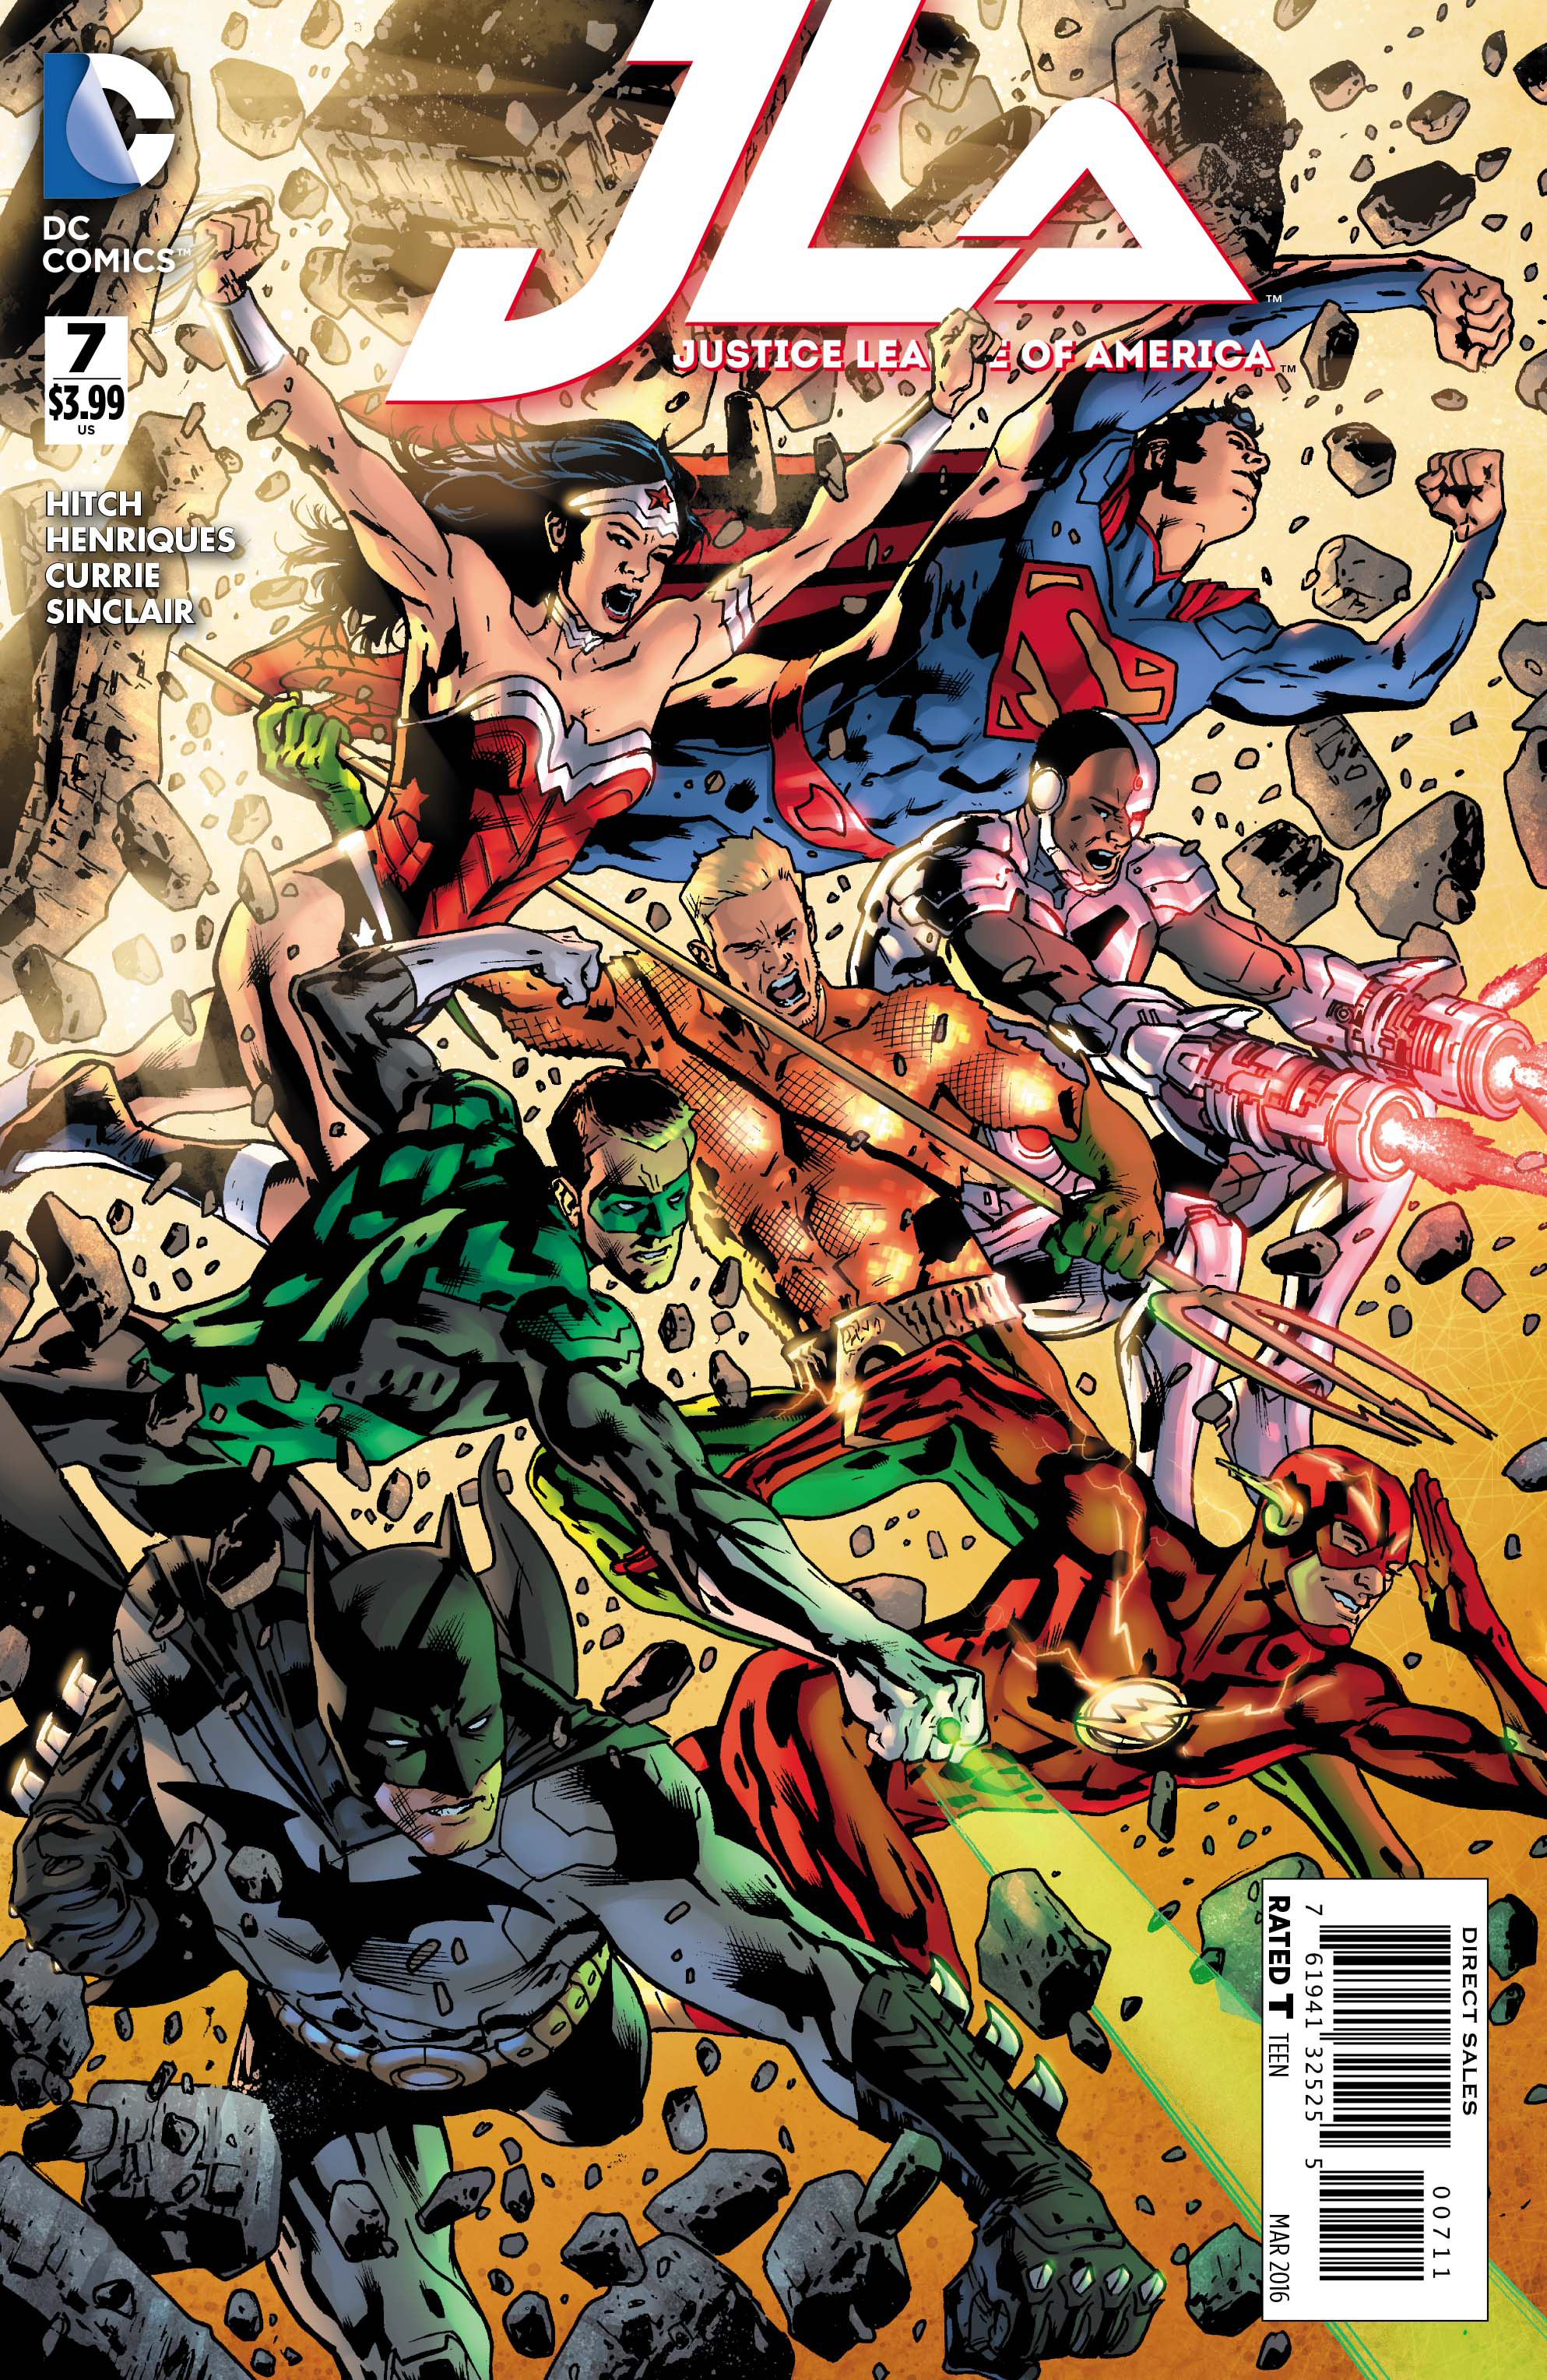 JUSTICE LEAGUE OF AMERICA #7 (RES)